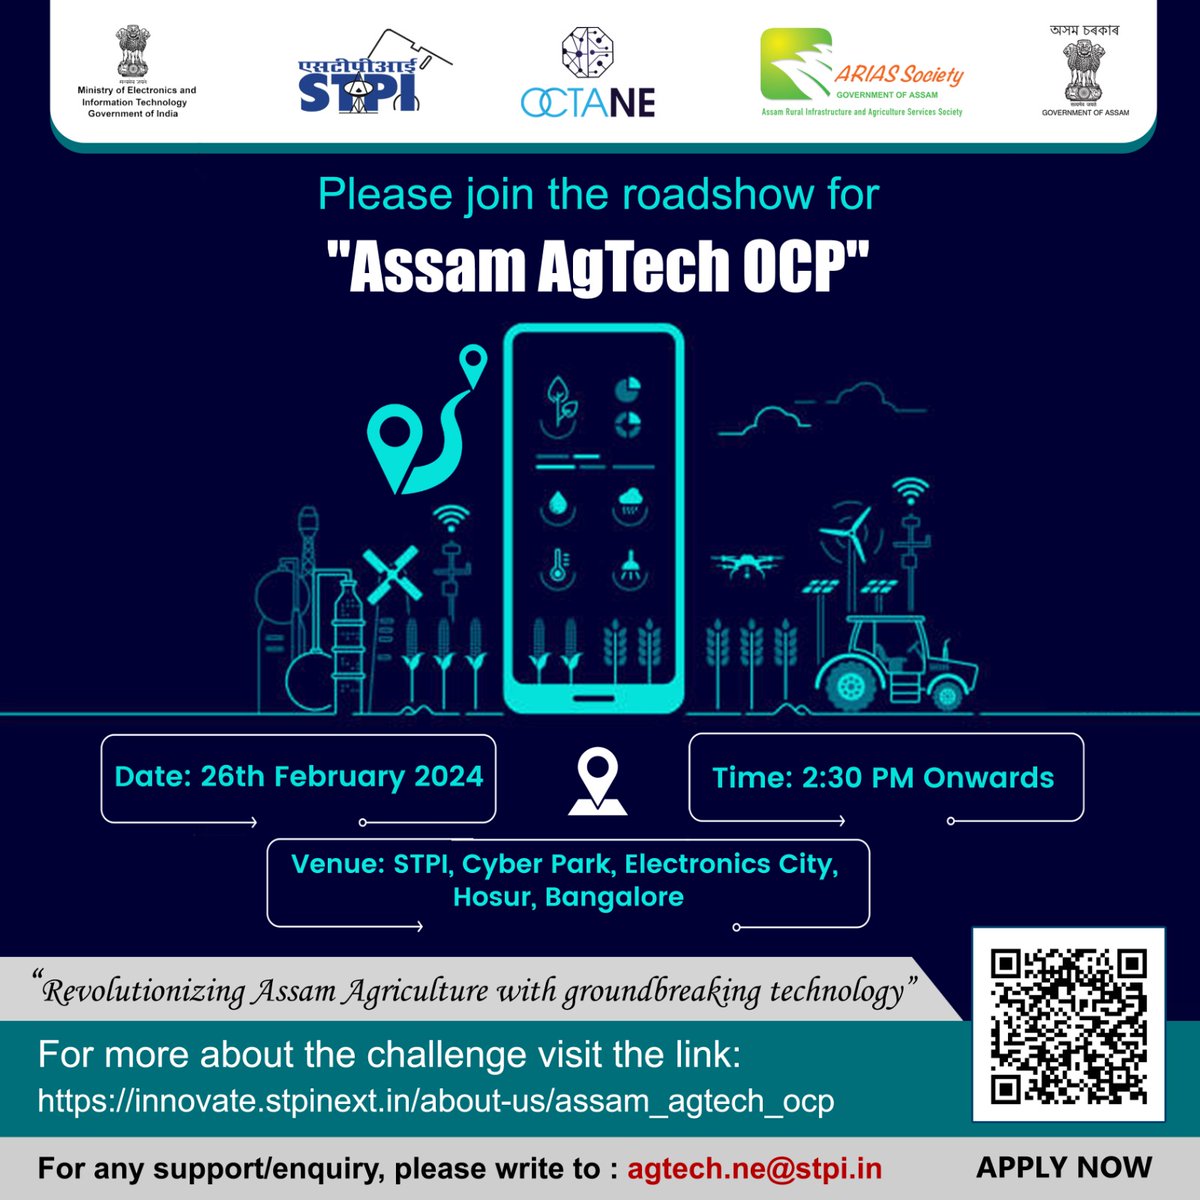 Technology #Startups #Entrepreneurs in #agriculture sector are invited to participate in the Roadshow for #AssamAgtechOCP at Bengaluru. Date: 26-Feb-2024 Time: 2.30 PM onwards Venue: STPI, Electronic City, Bengaluru